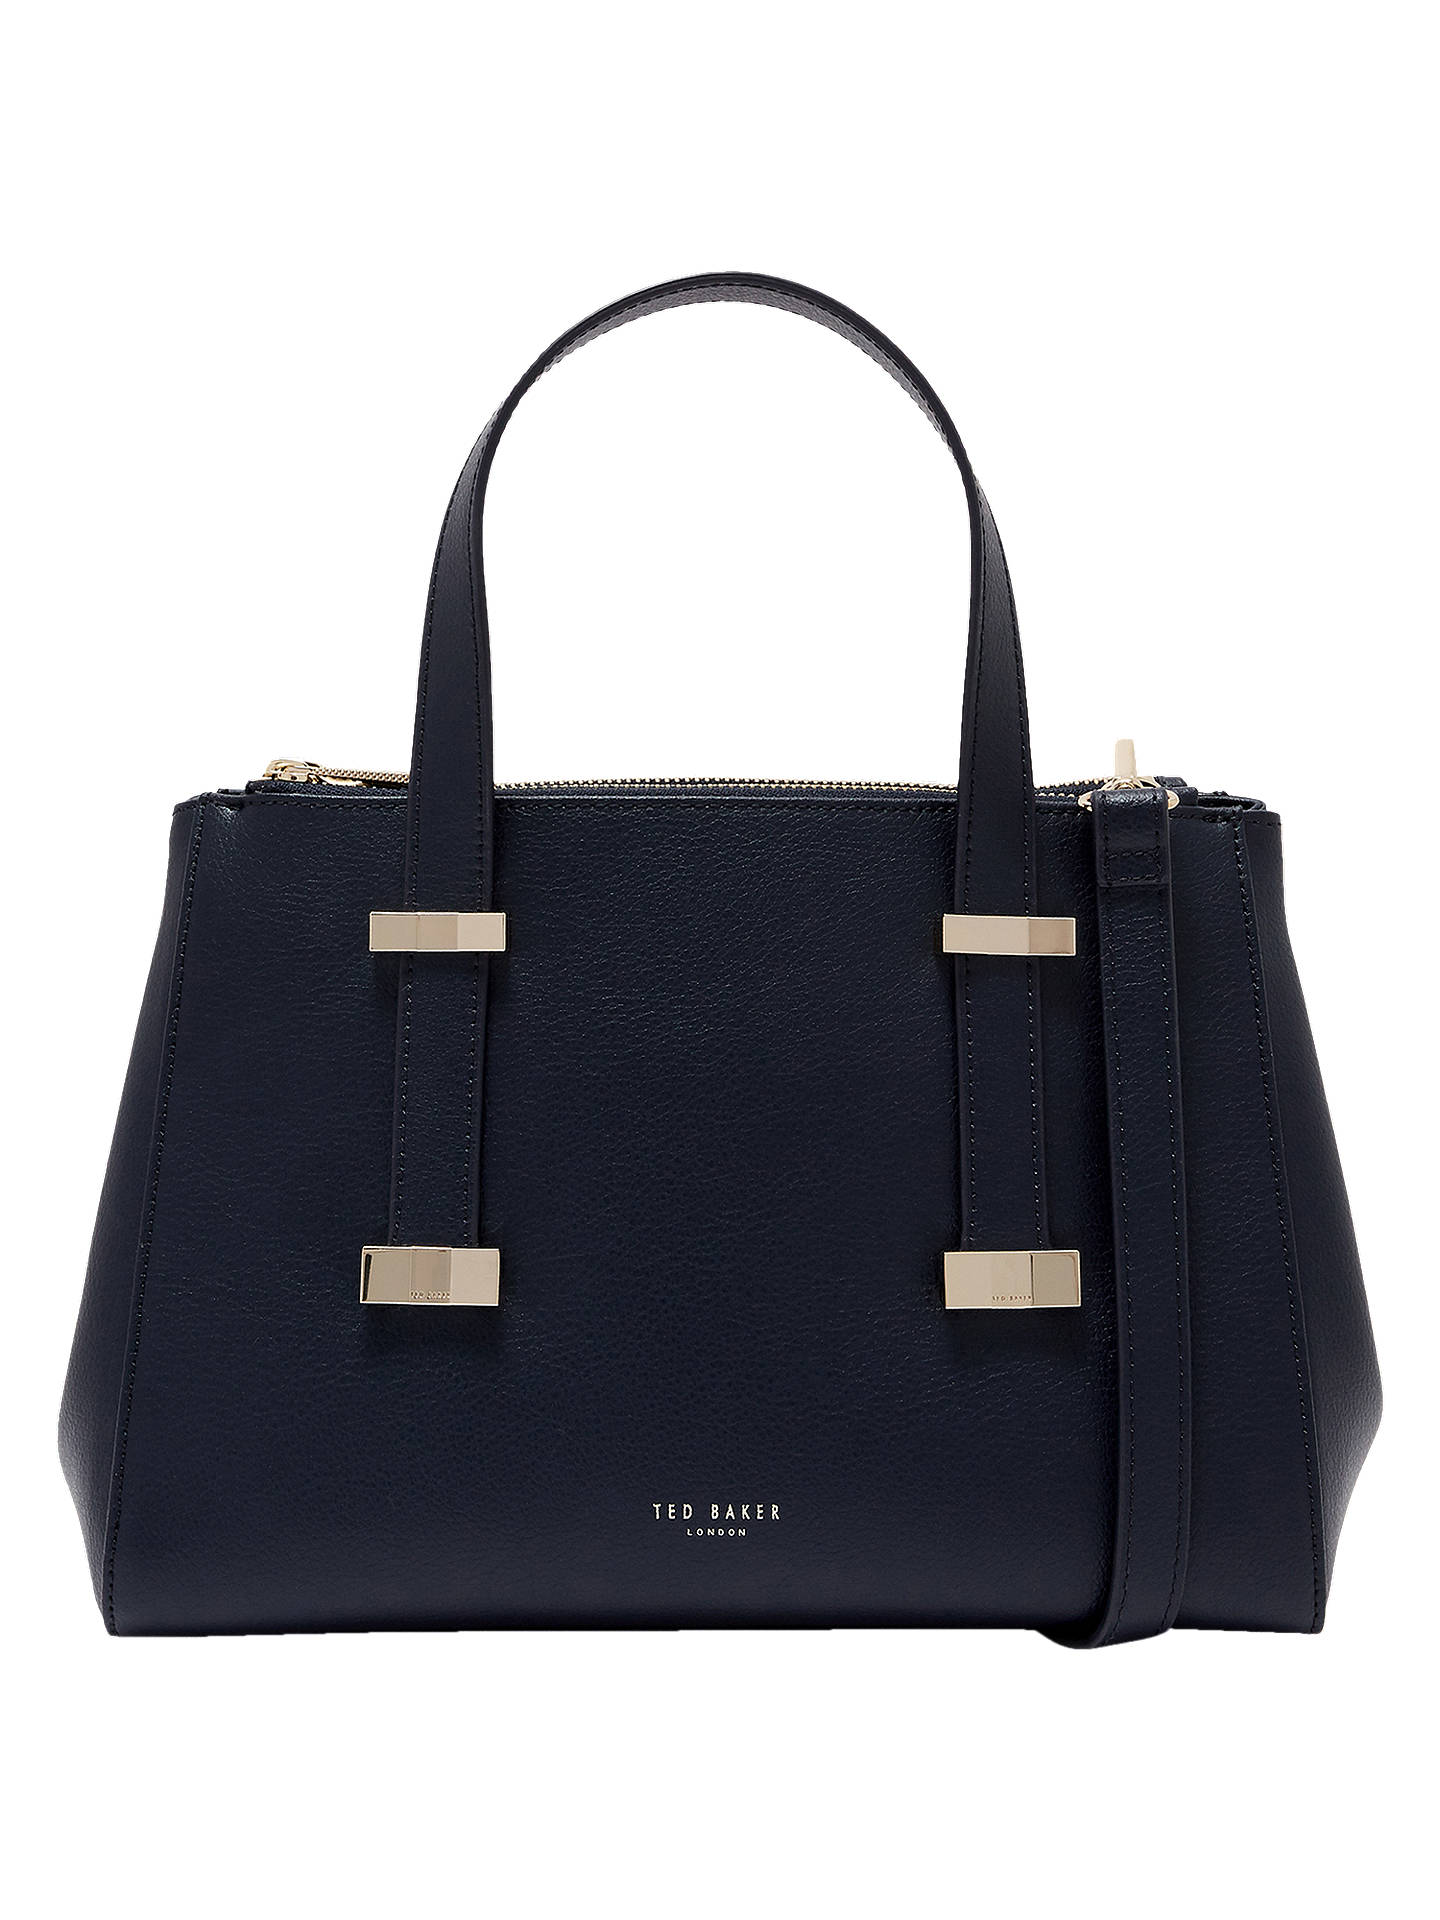 Ted Baker Alyssaa Small Leather Tote Bag at John Lewis & Partners